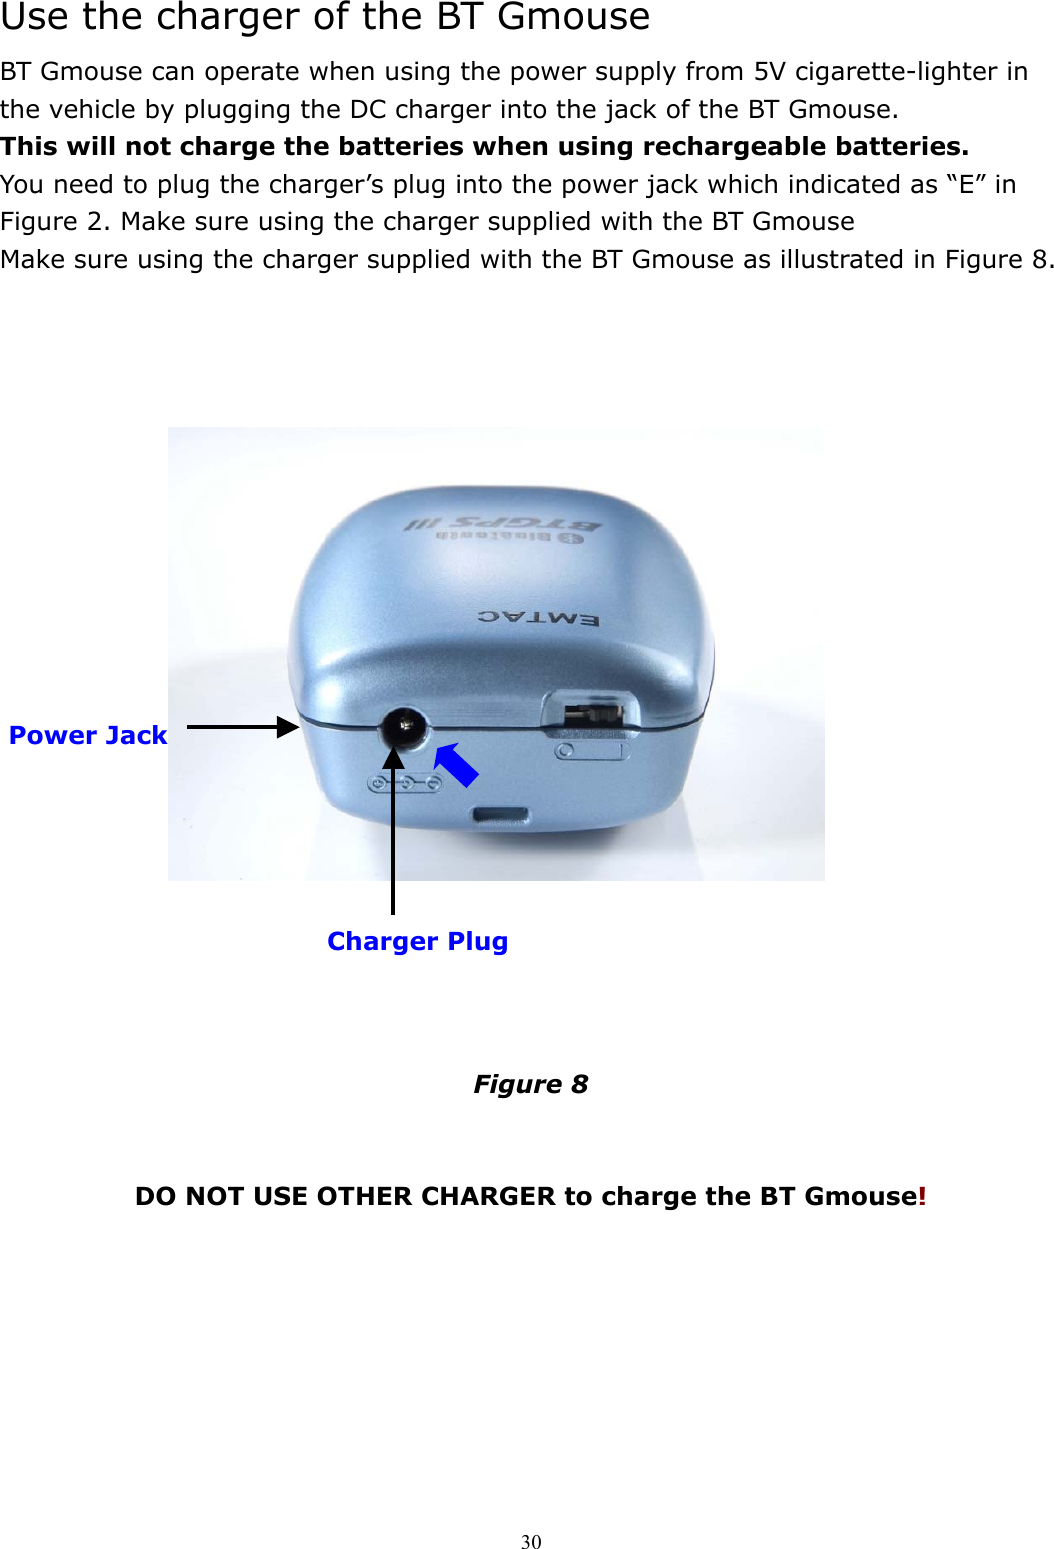  30Use the charger of the BT Gmouse BT Gmouse can operate when using the power supply from 5V cigarette-lighter in the vehicle by plugging the DC charger into the jack of the BT Gmouse.   This will not charge the batteries when using rechargeable batteries.   You need to plug the charger’s plug into the power jack which indicated as “E” in Figure 2. Make sure using the charger supplied with the BT Gmouse   Make sure using the charger supplied with the BT Gmouse as illustrated in Figure 8.                                    Figure 8   DO NOT USE OTHER CHARGER to charge the BT Gmouse!   Power Jack  Charger Plug 